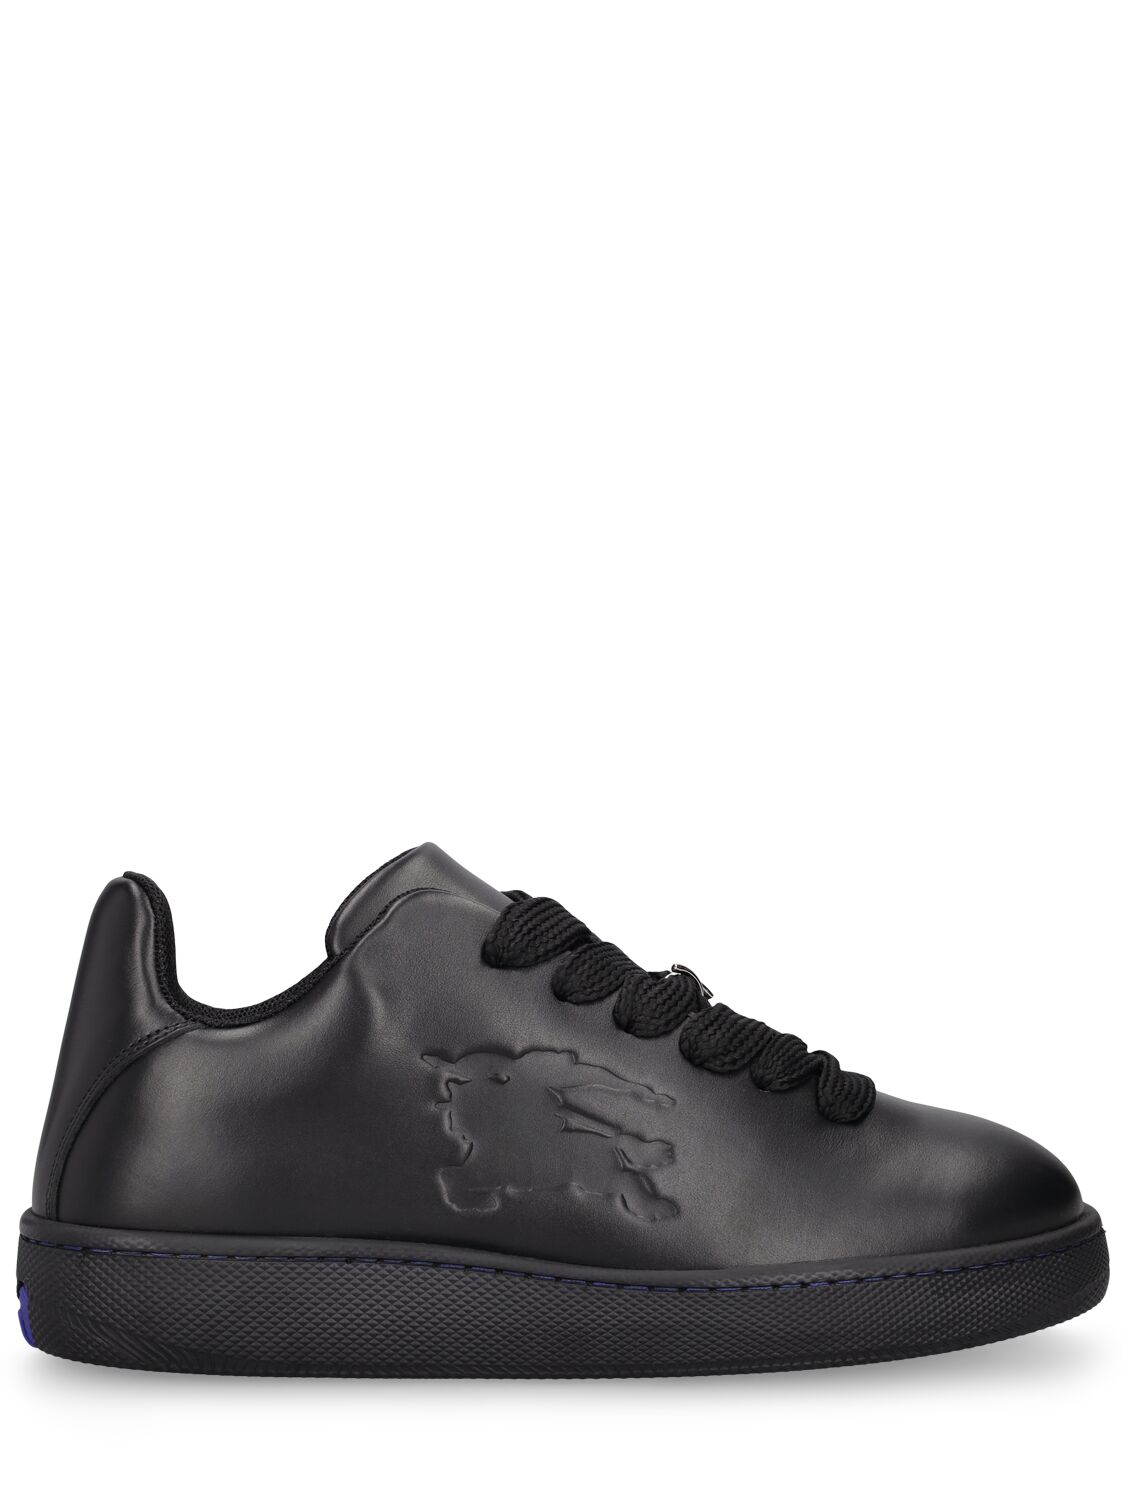 Image of Mf Ms25 Leather Low Top Sneakers